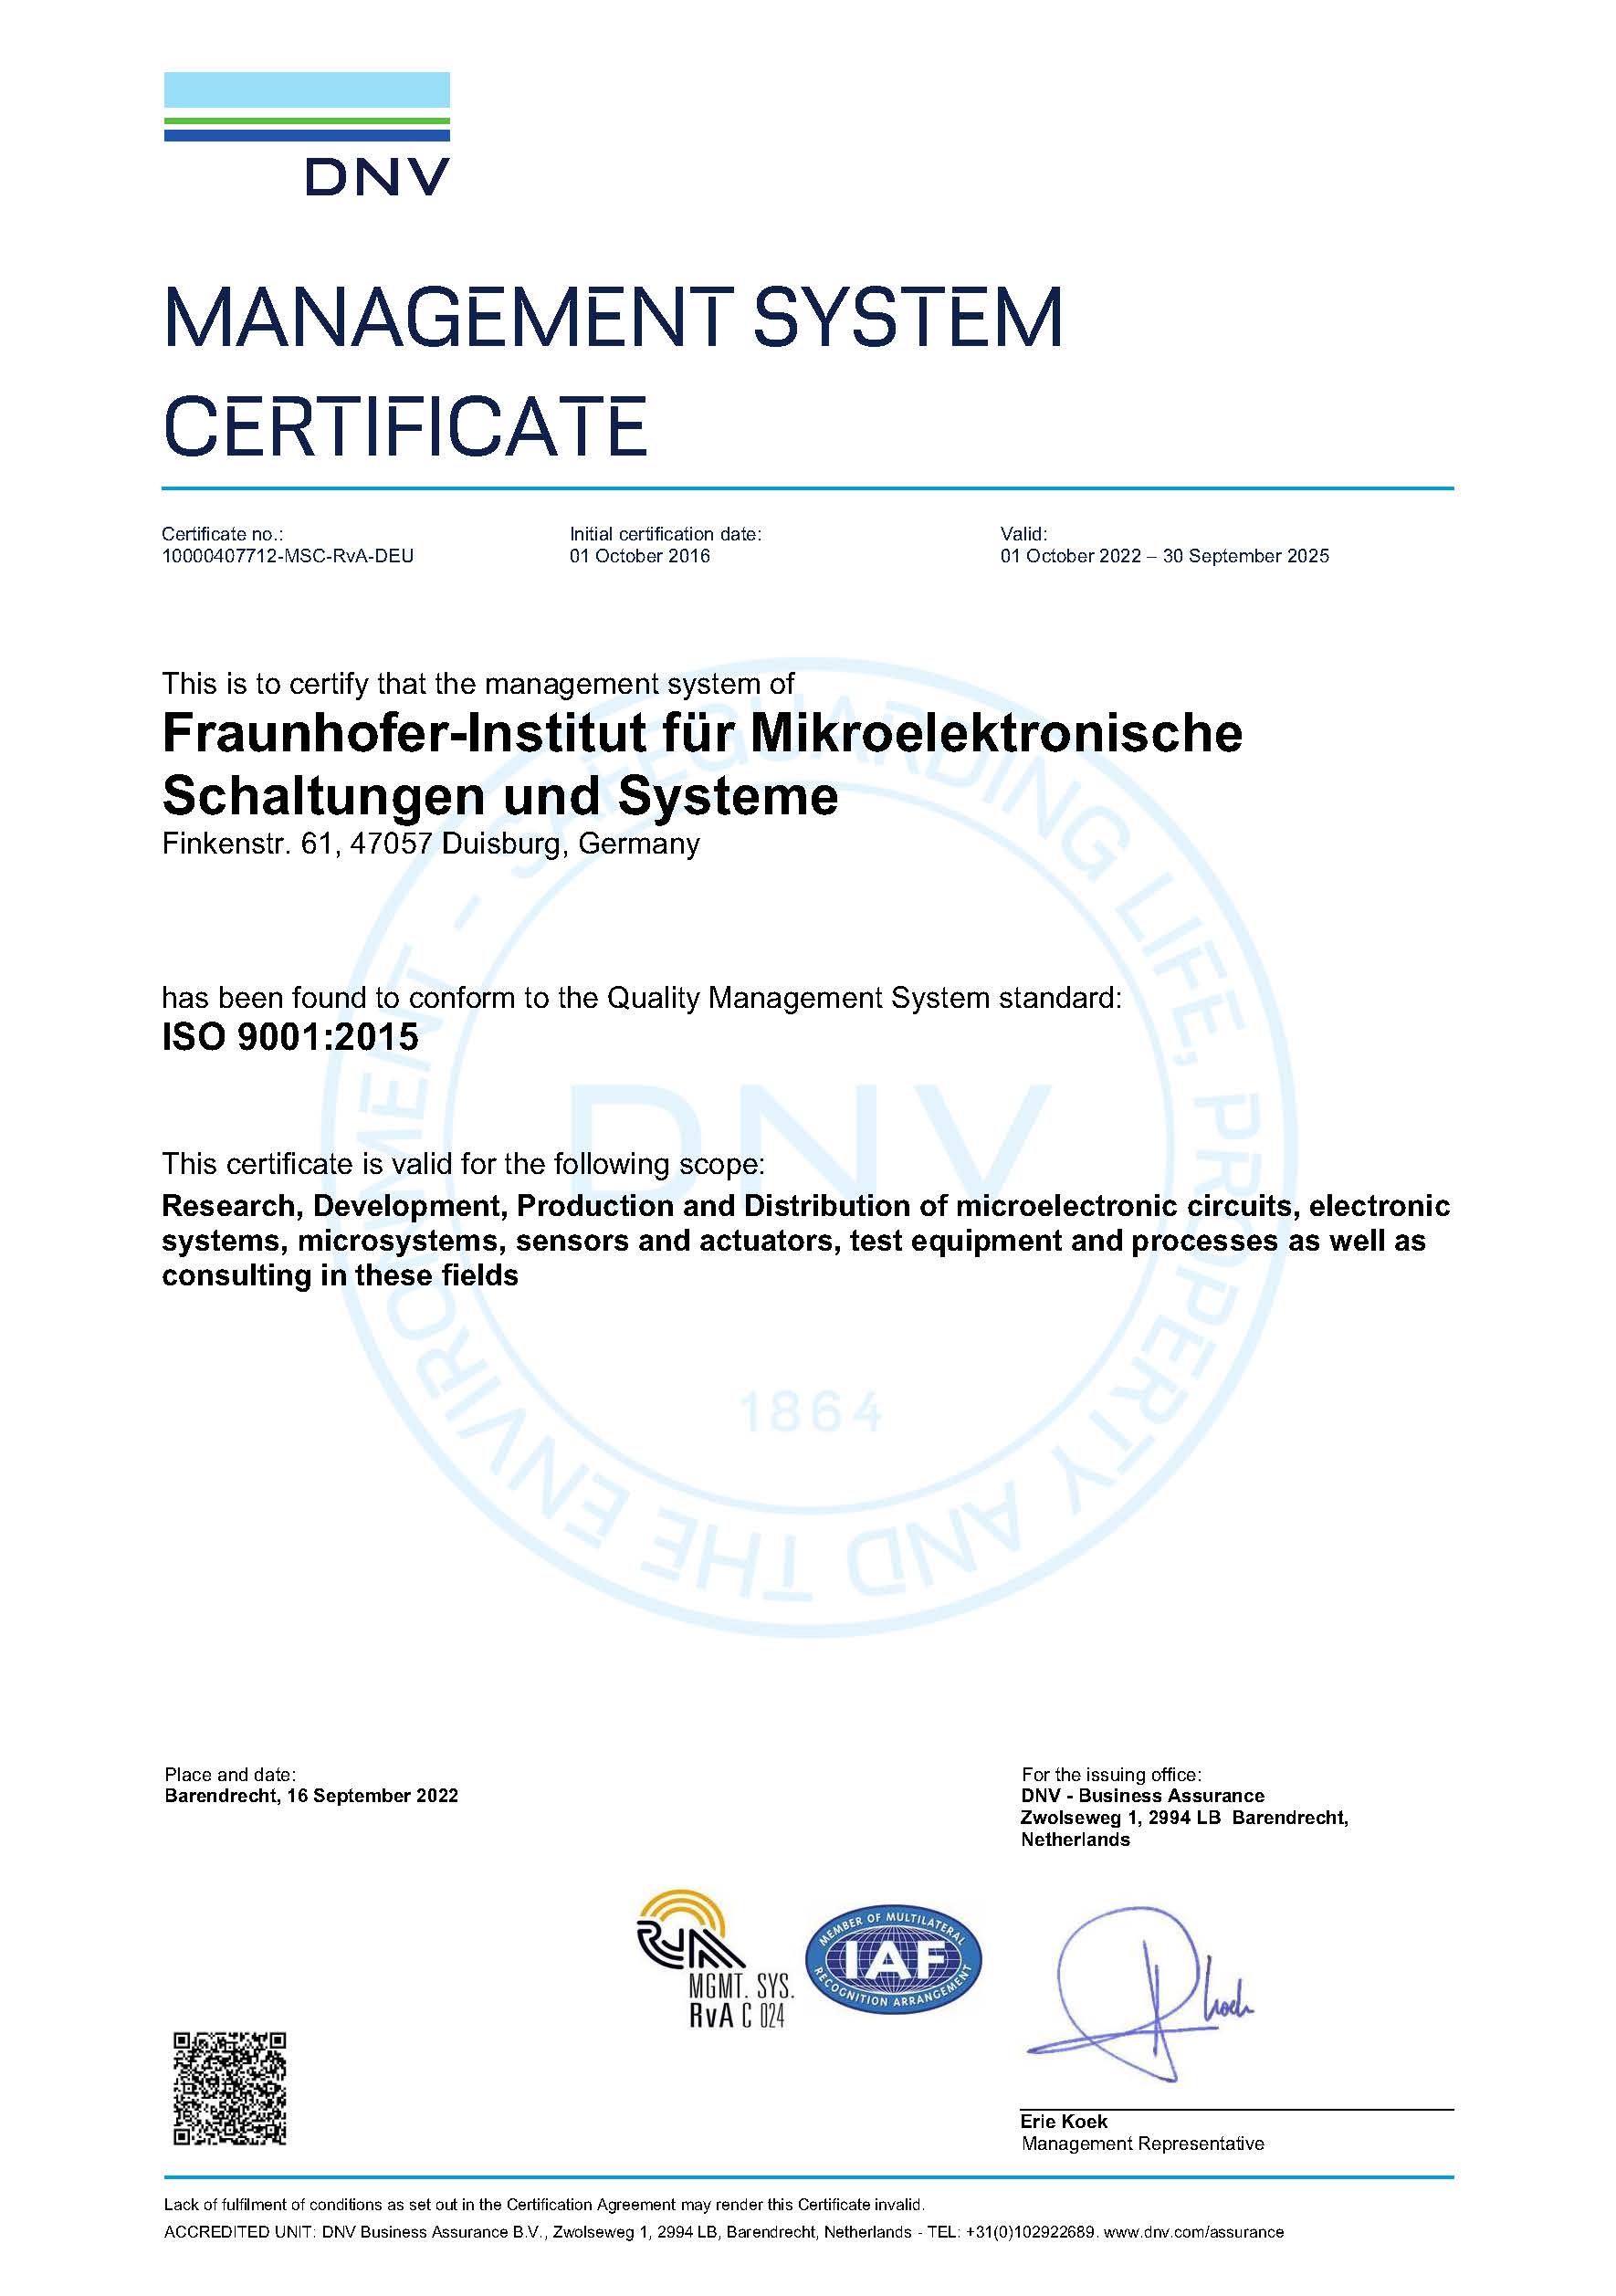 A picture of the certification according to DIN EN ISO 9001